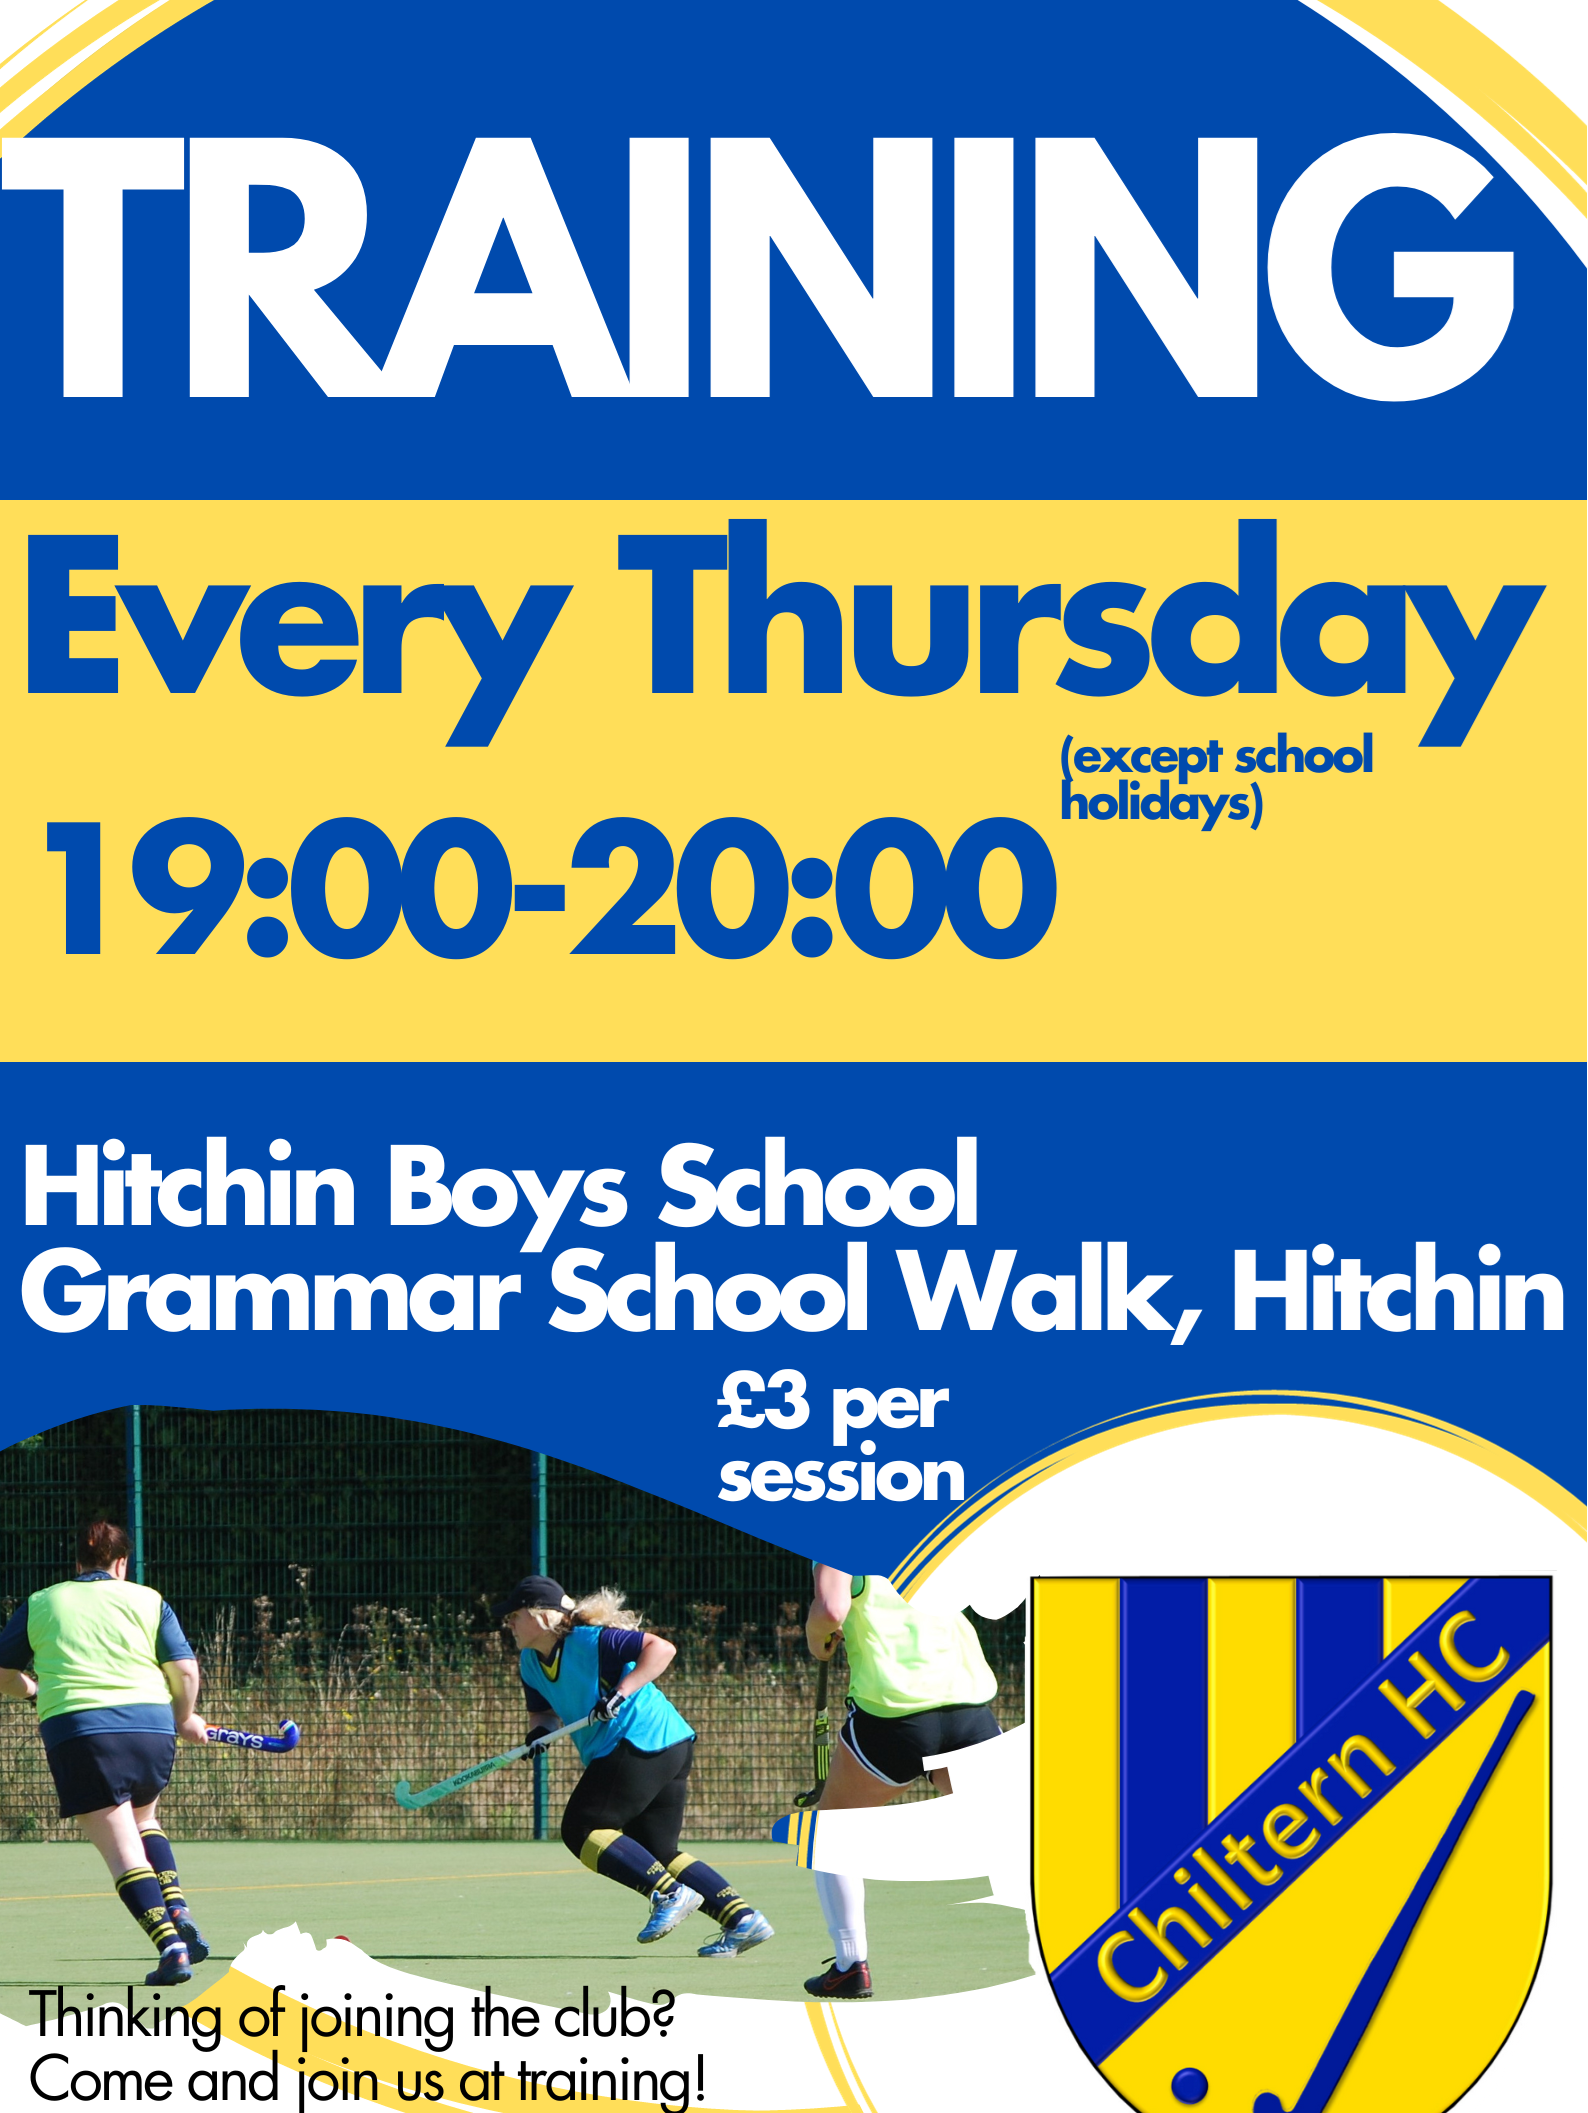 A chiltern hockey poster titled 'Training'. Every Thursday (except school holidays) 19:00-20:00. At Hitchin Boys School Grammar School Walk, Hitchin. 3 pounds per session. Thinking of joining the club? Come and join us at at training